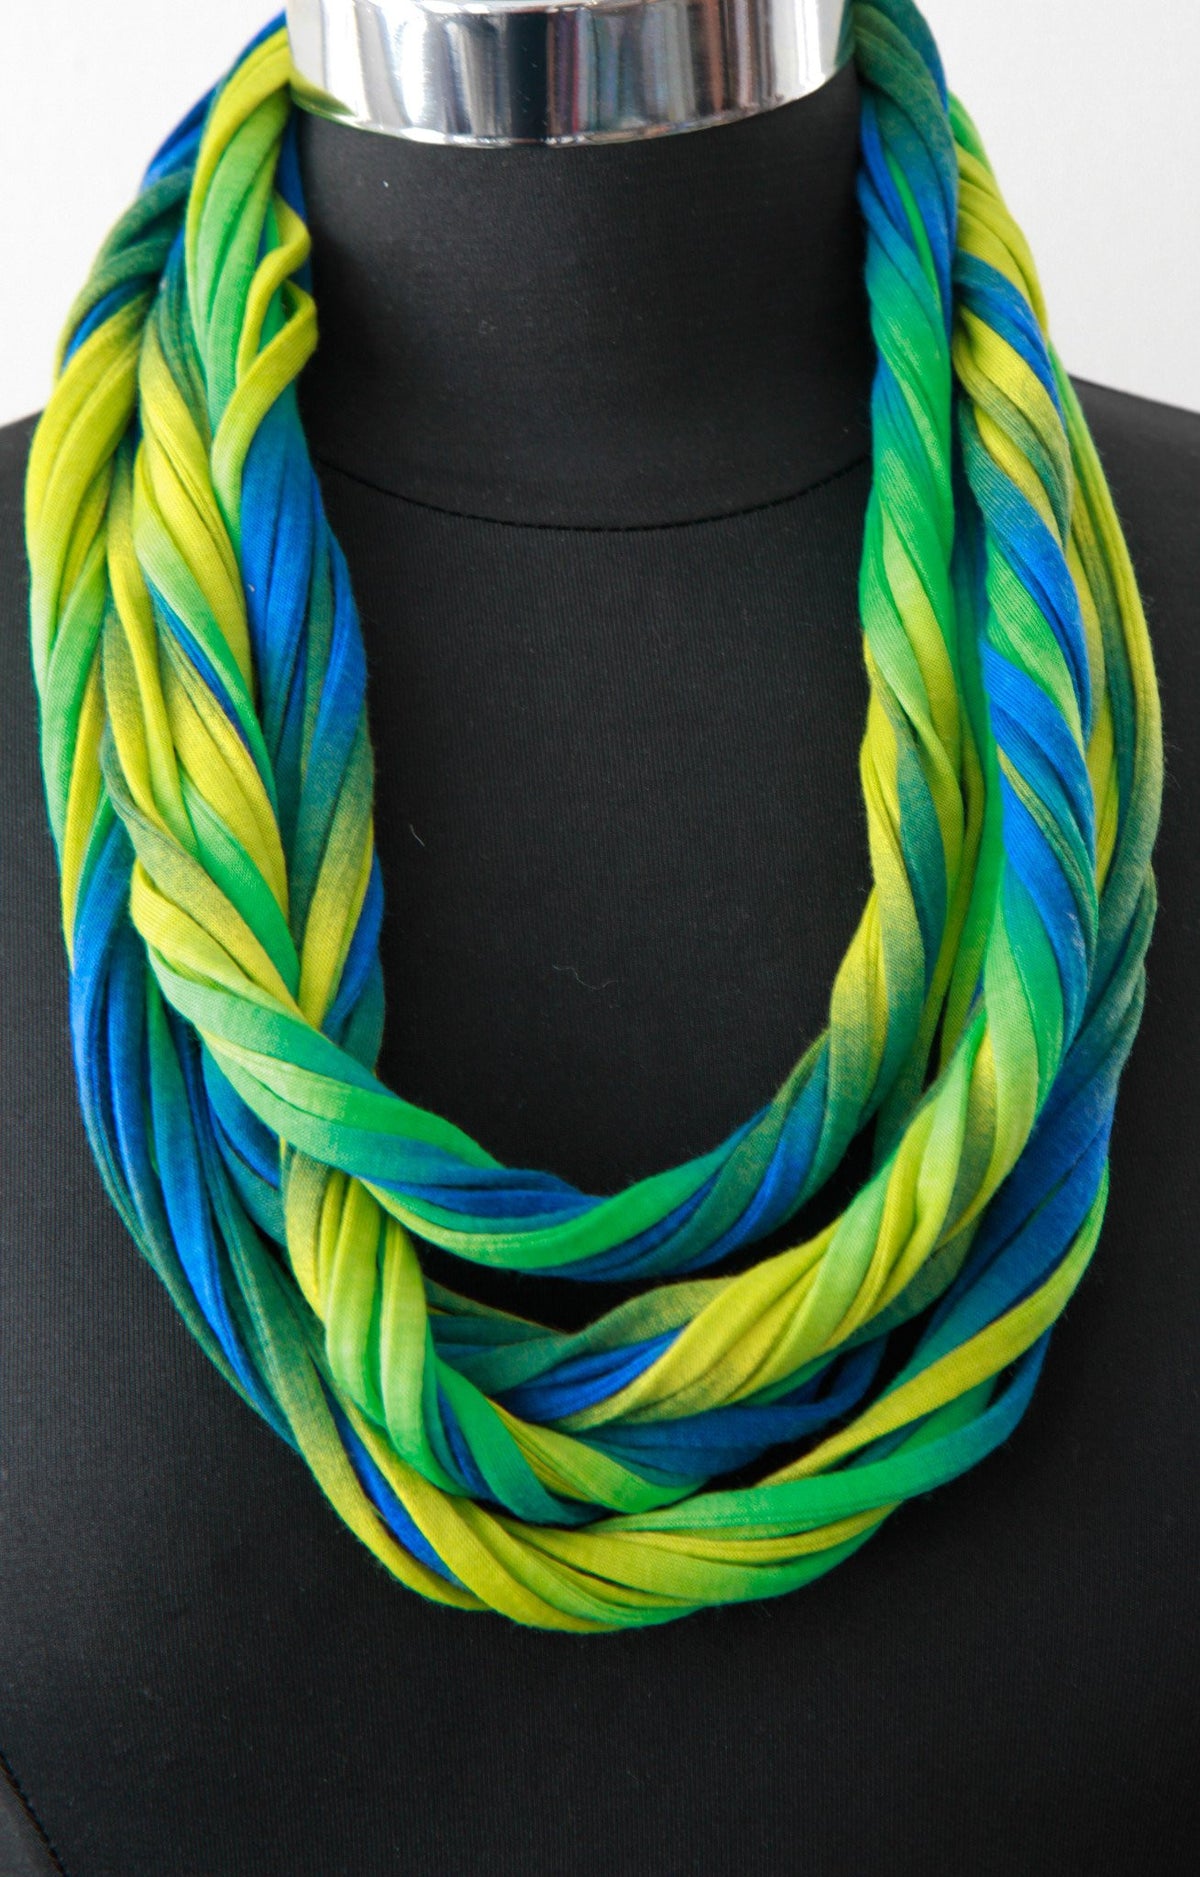 Lime Green and Blue Ombre Print Scarf or Necklace for Women